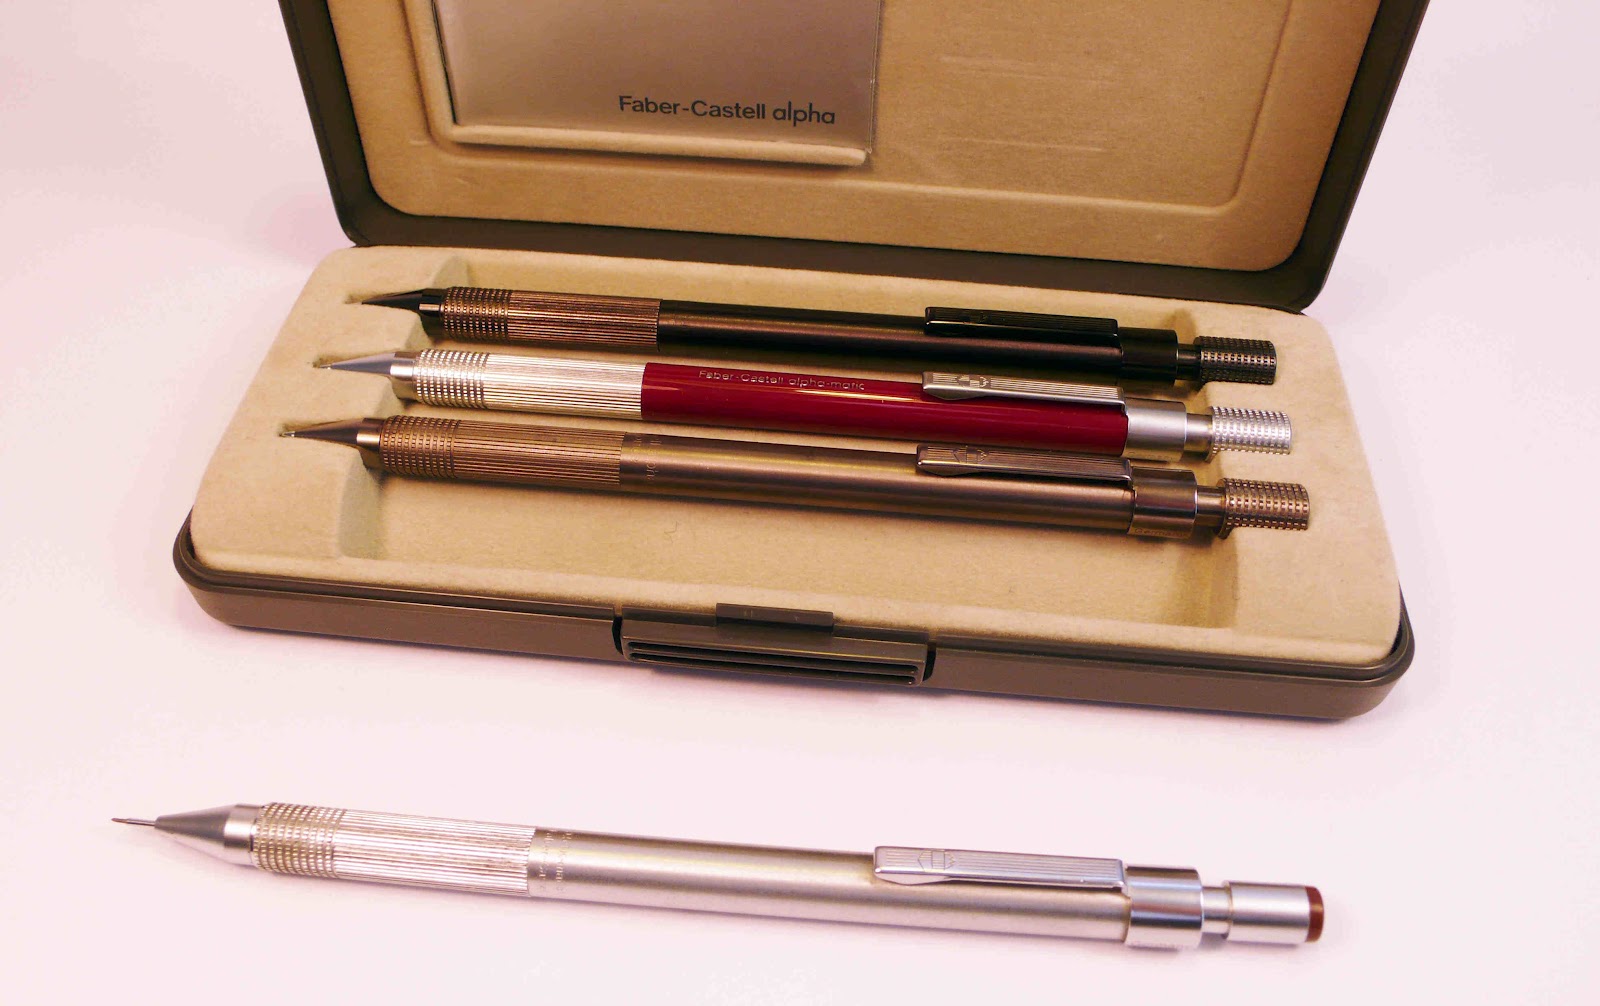 DMP - Dave's Mechanical Pencils: Faber-Castell Alpha-matic and TK